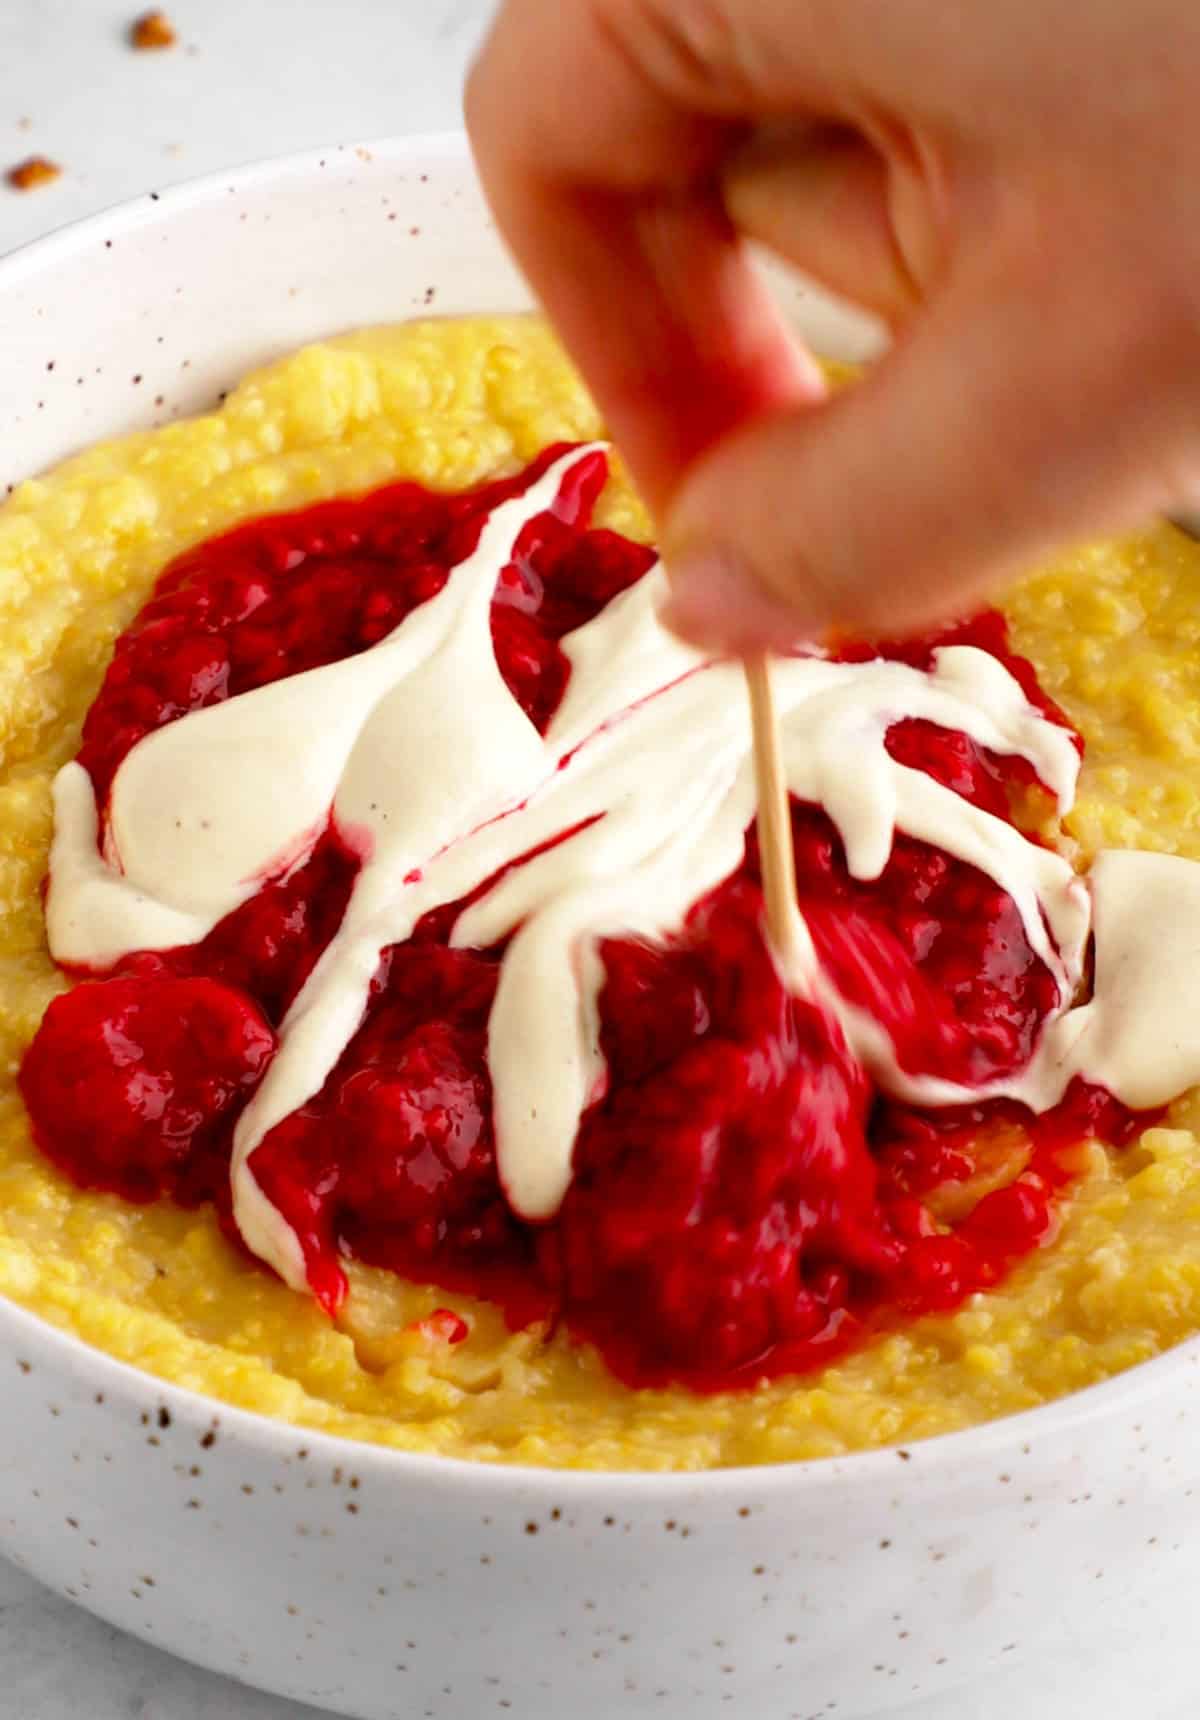 Cashew cream drizzled over the berry compote vegan grits bowl with a hand using a toothpick to swirl it around.